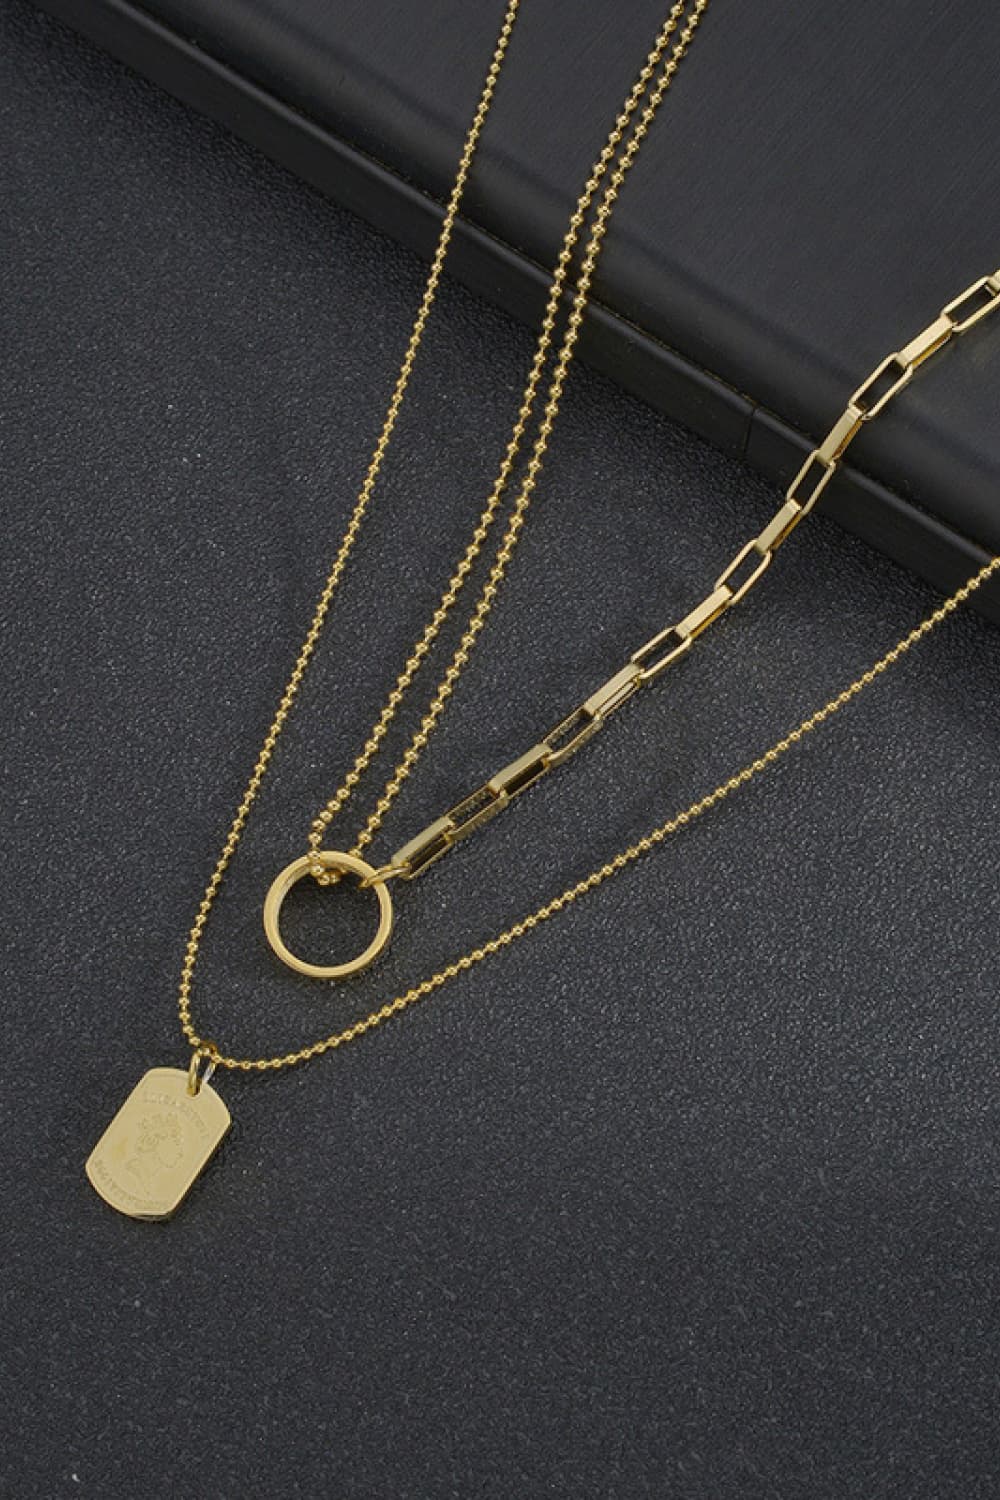 Stainless Steel Tag Pendant Necklace